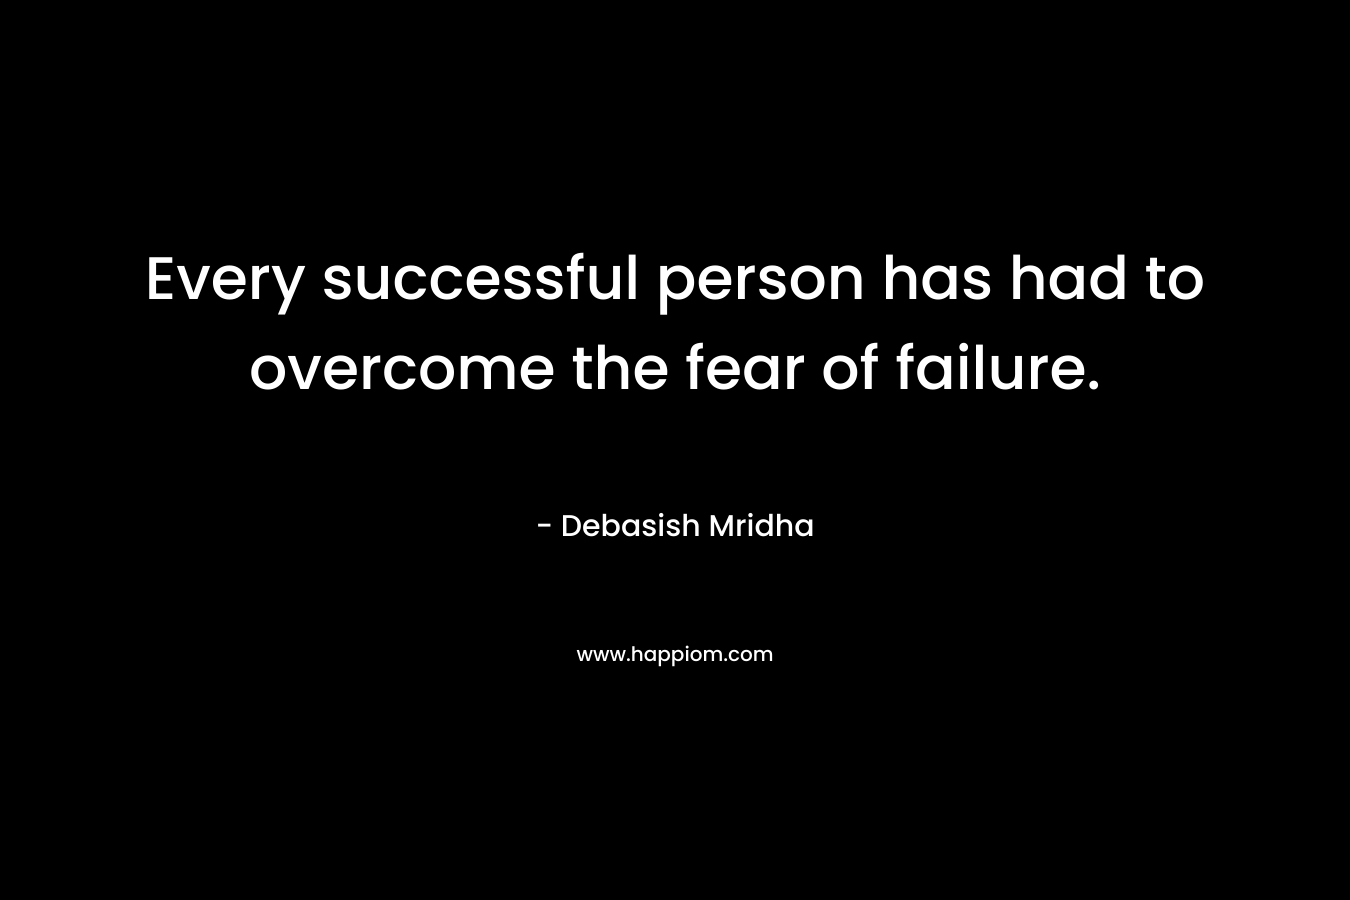 Every successful person has had to overcome the fear of failure. – Debasish Mridha